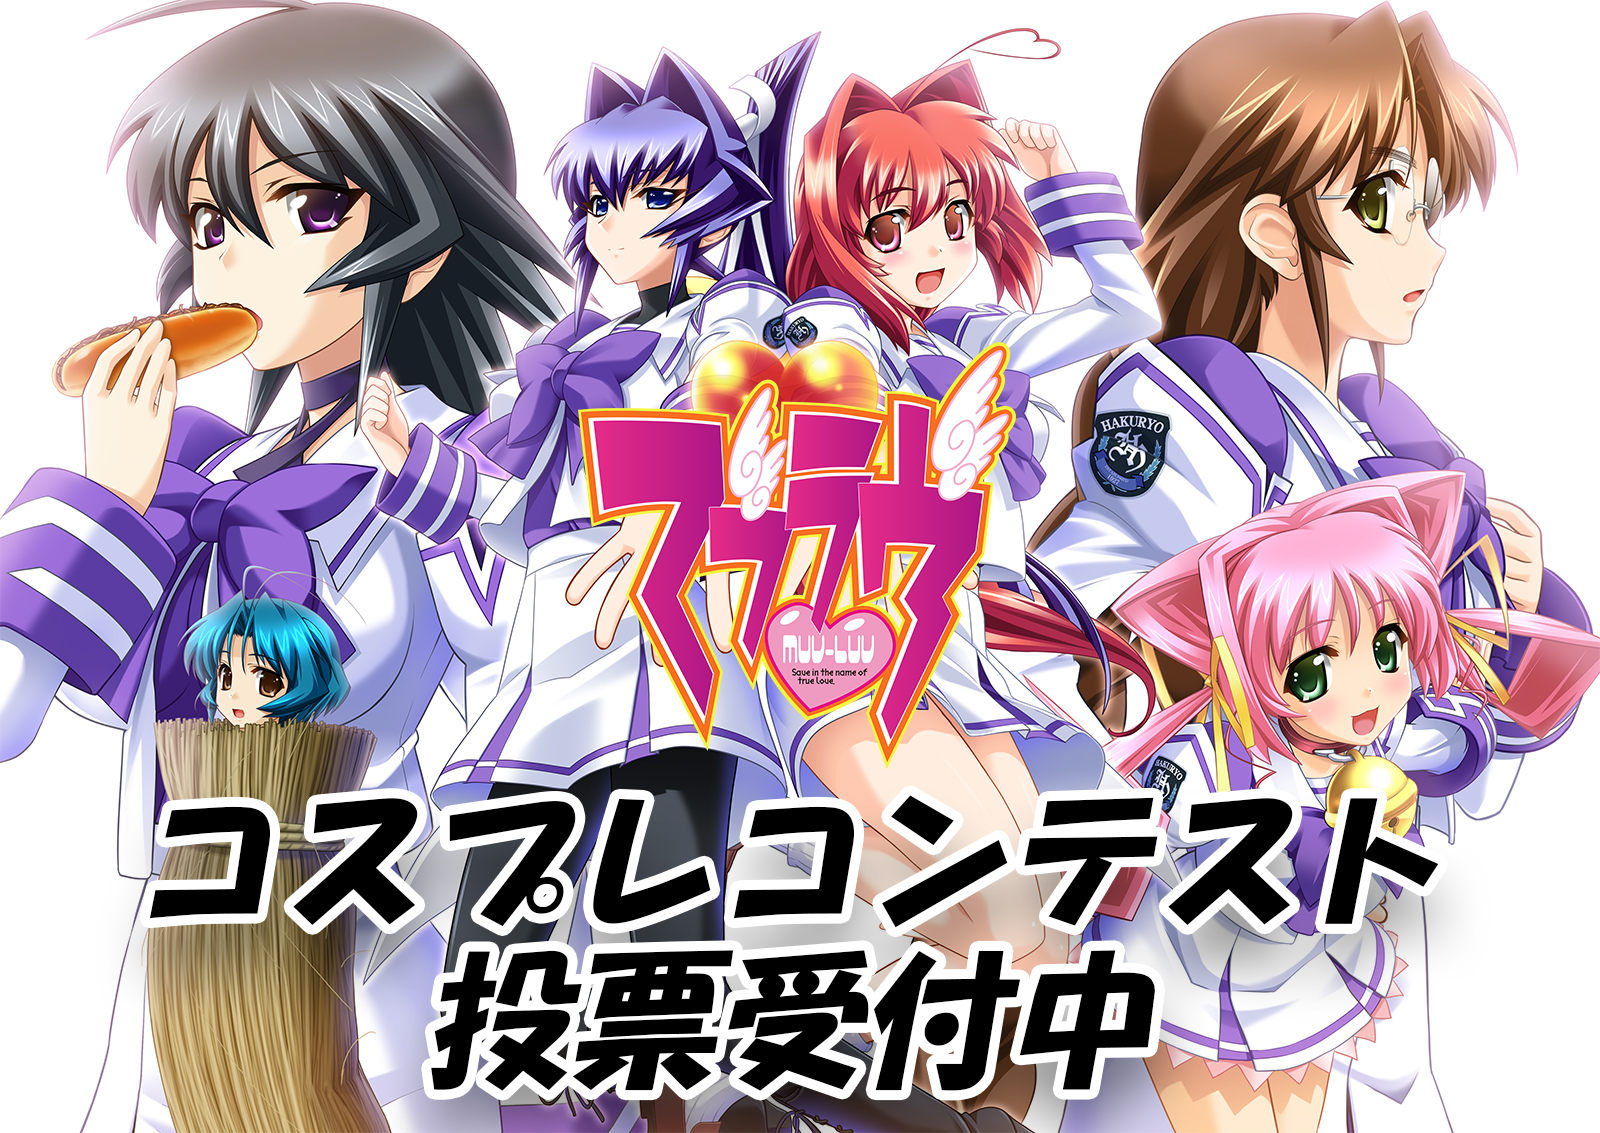 Total Prize of 1,000,000 JPY- Voting Term has Started for “MUV-LUV” Cosplay Contest